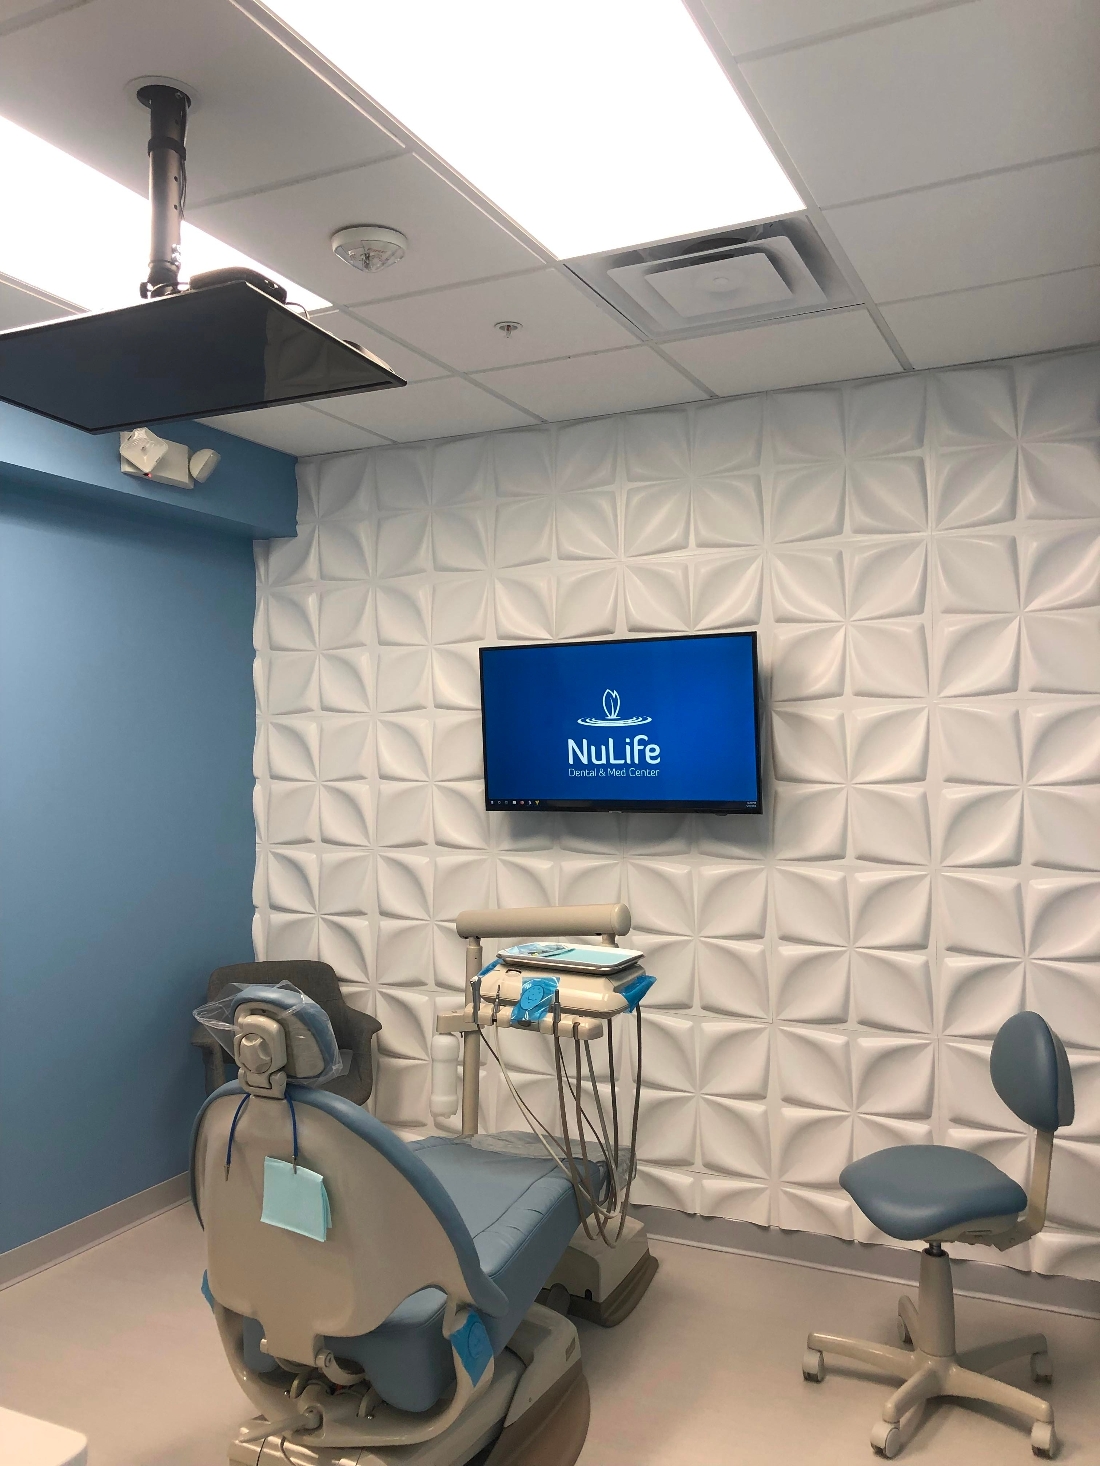 Comfortable Patient Rooms with Ceiling Televisions